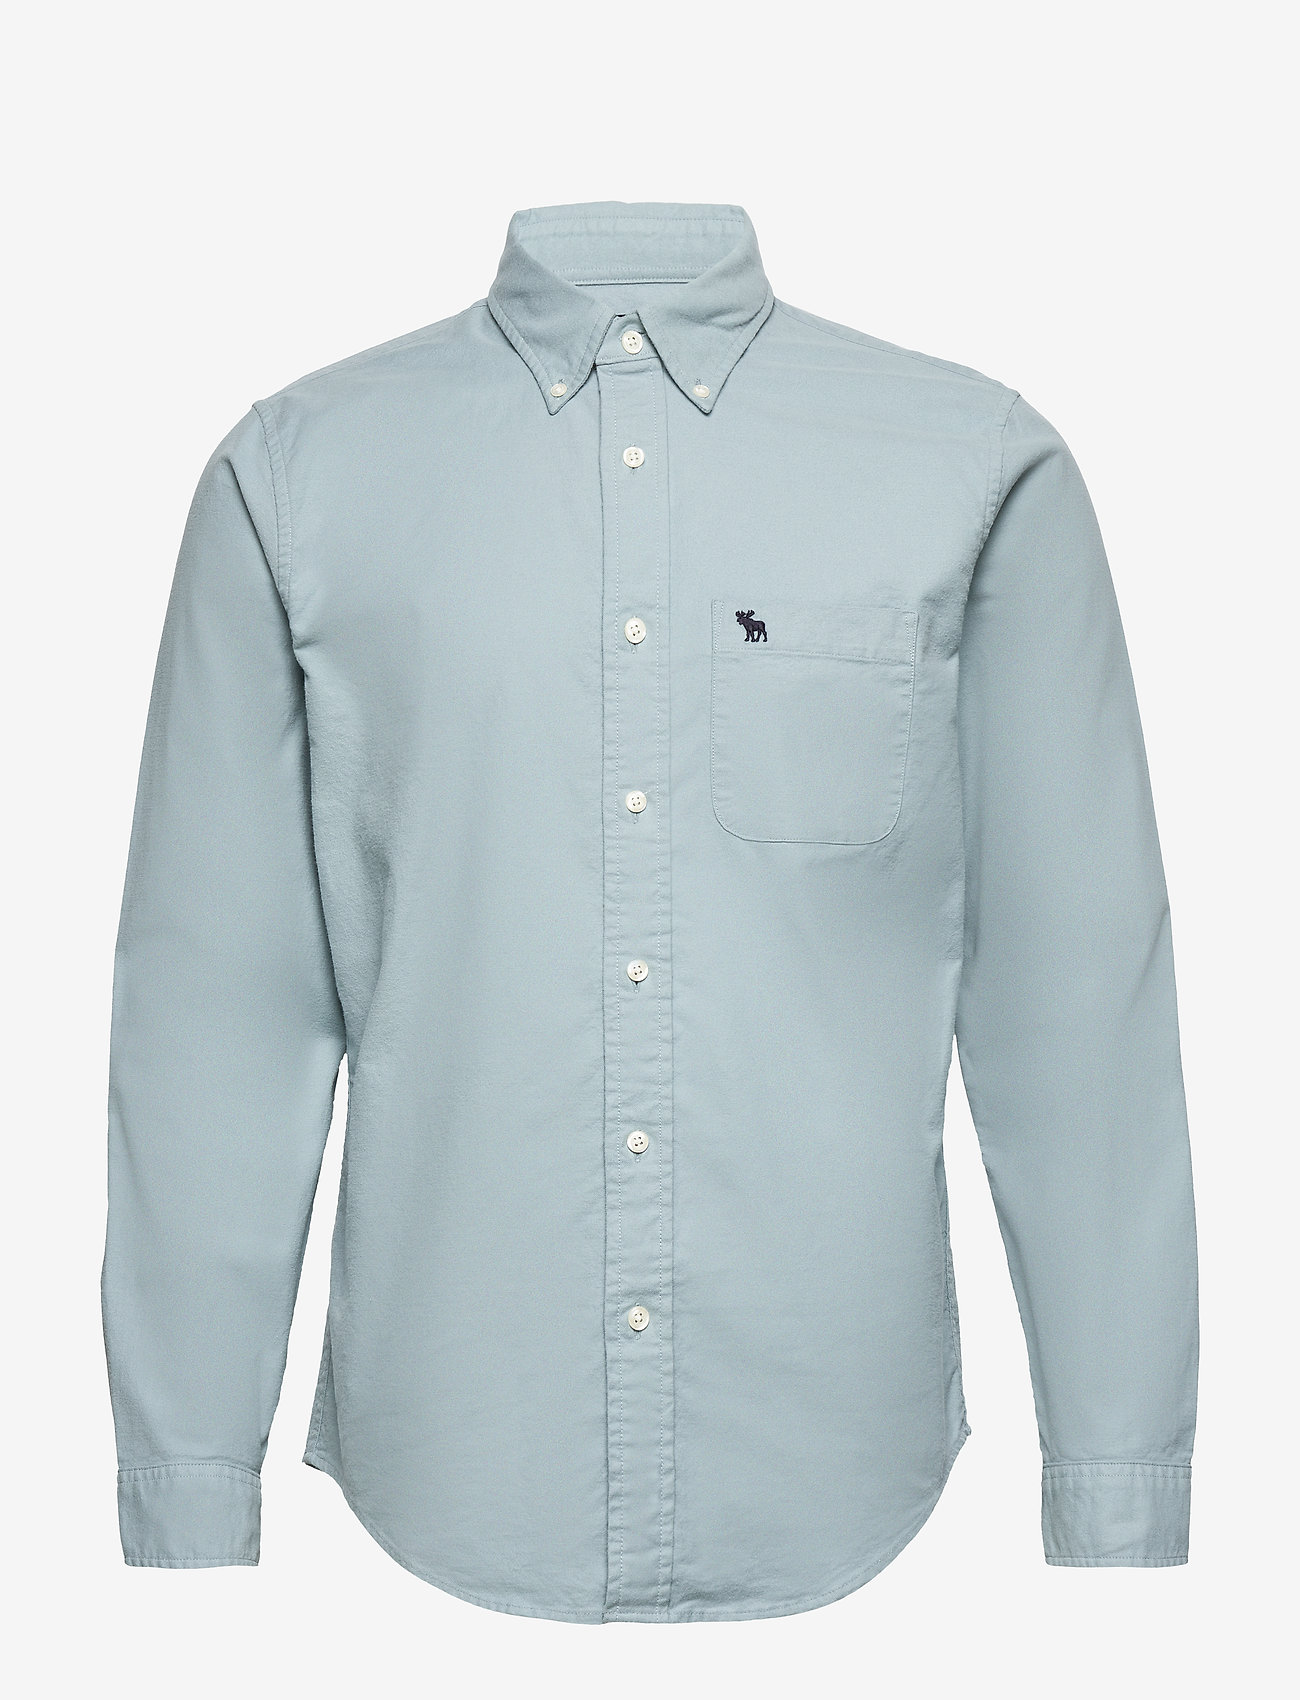 abercrombie button up